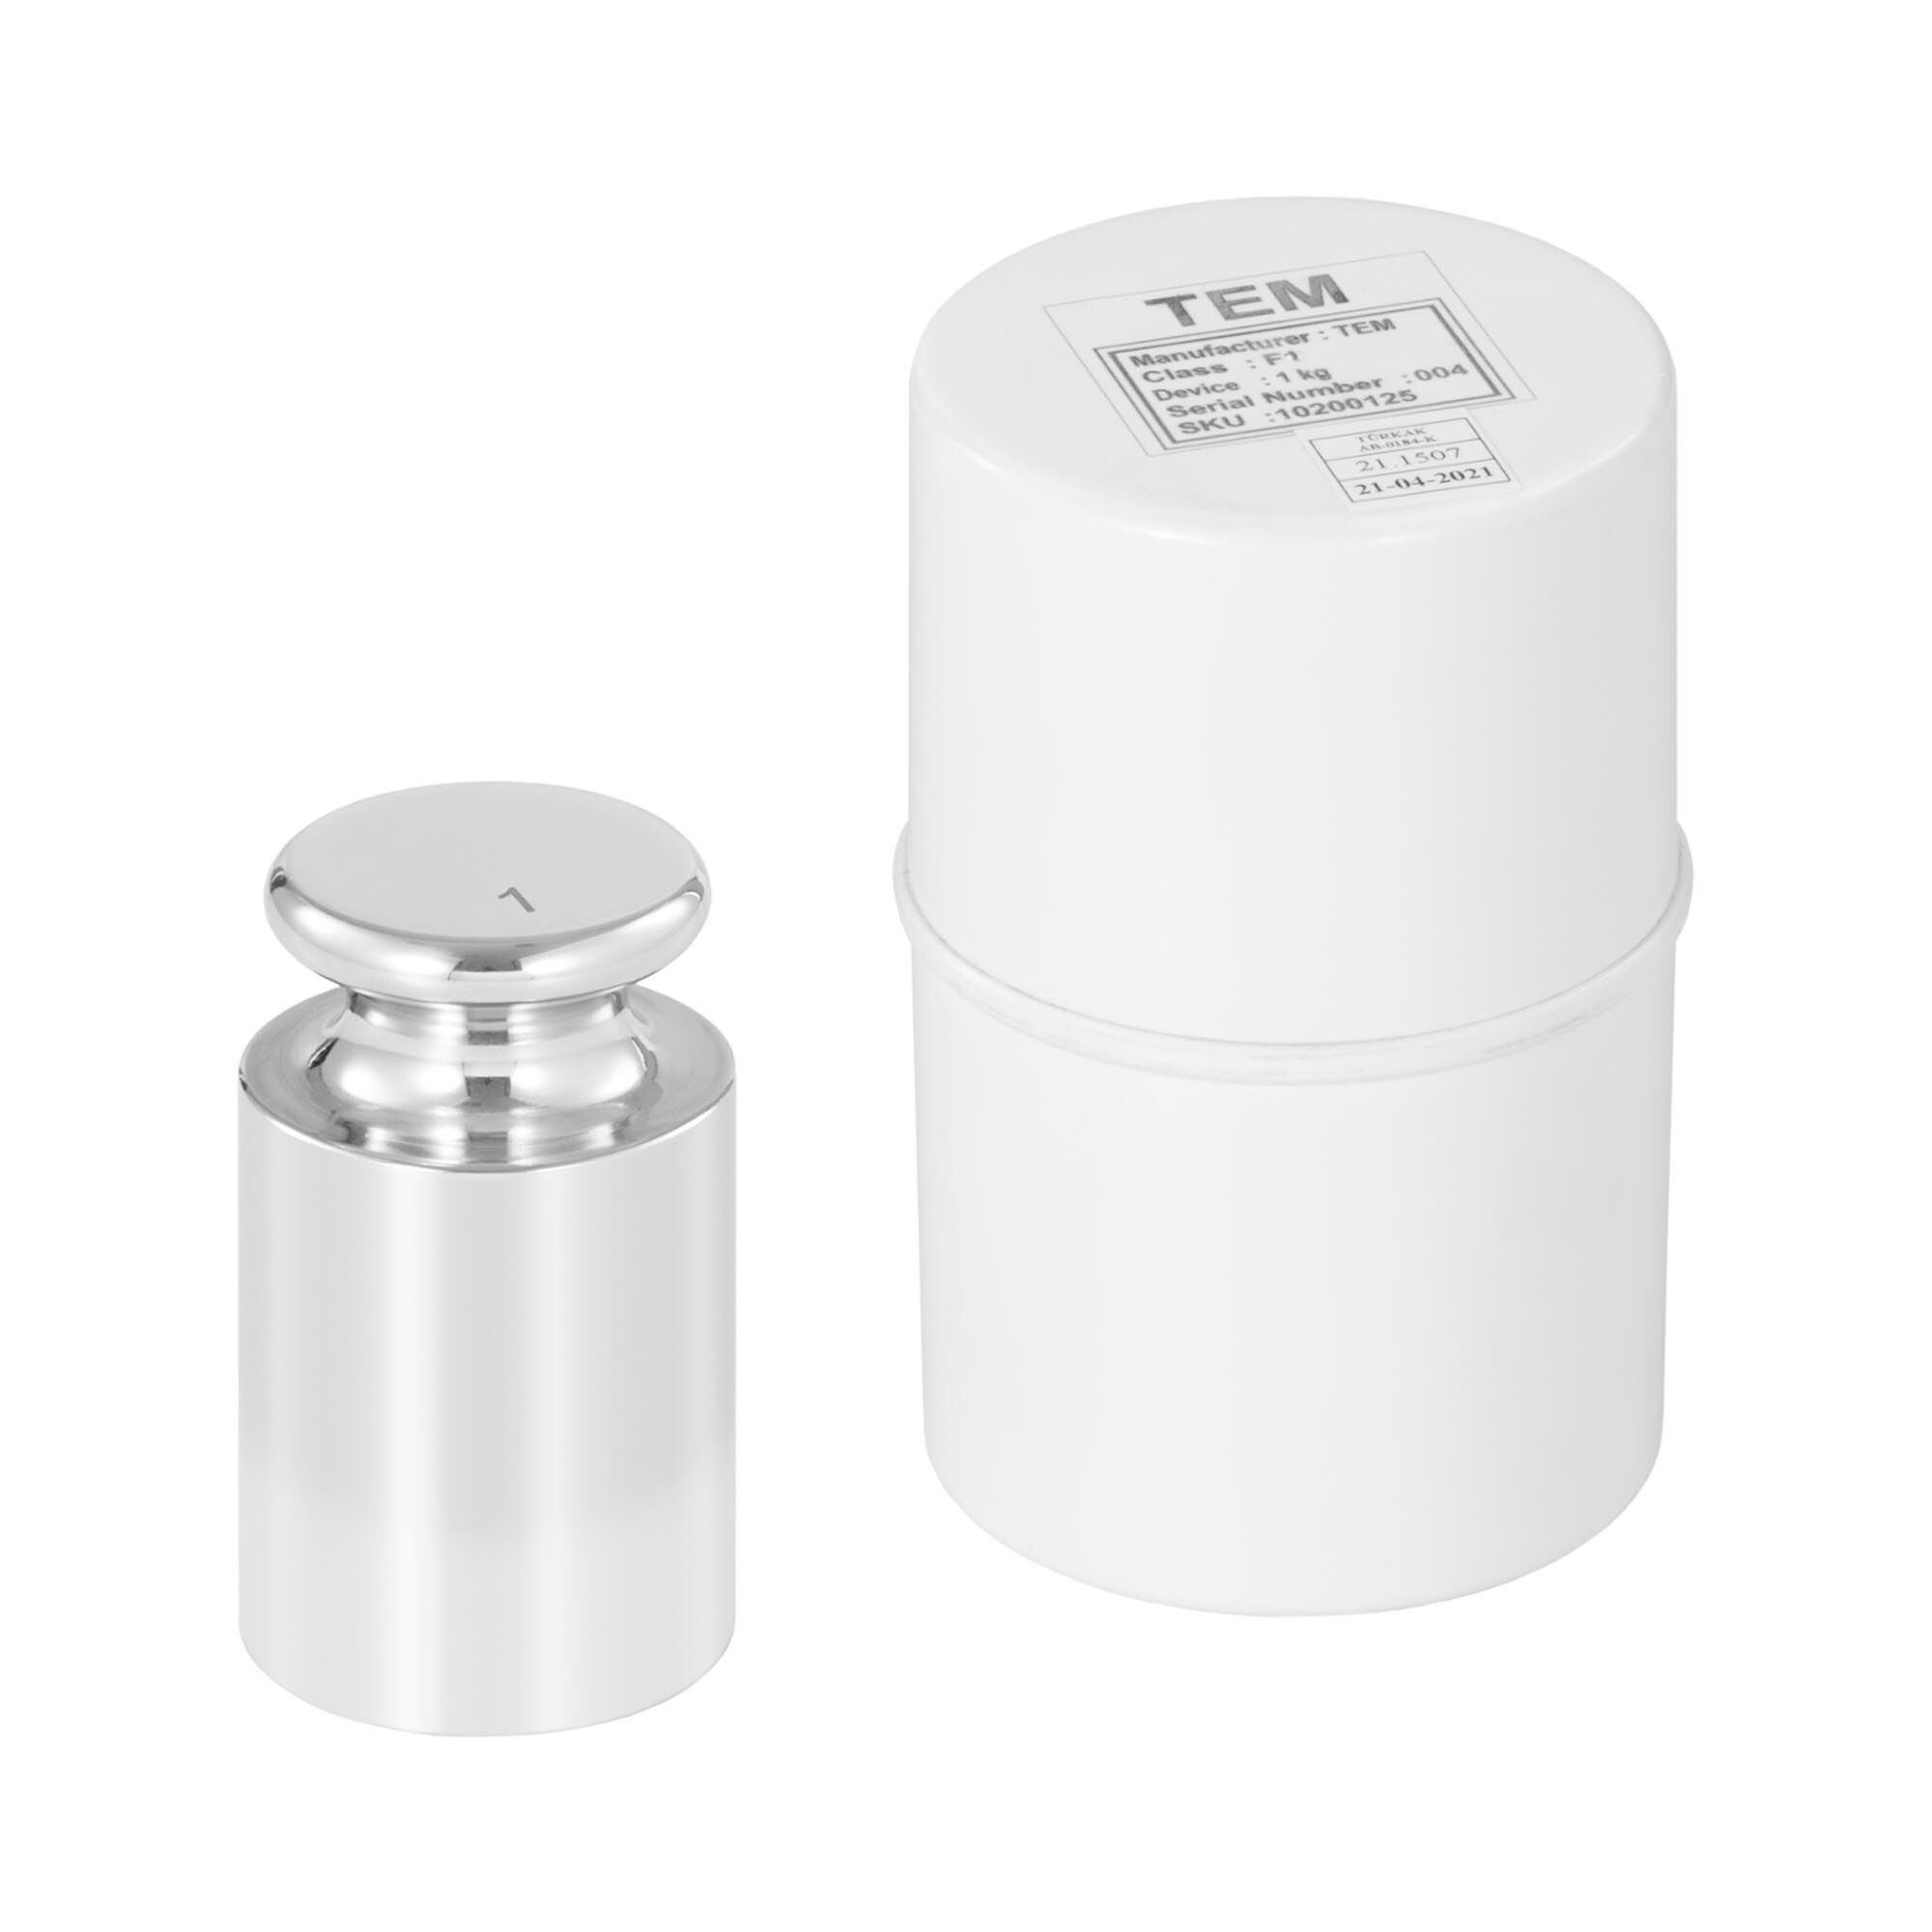 TEM Calibration Weight - 1 kg - Stainless steel